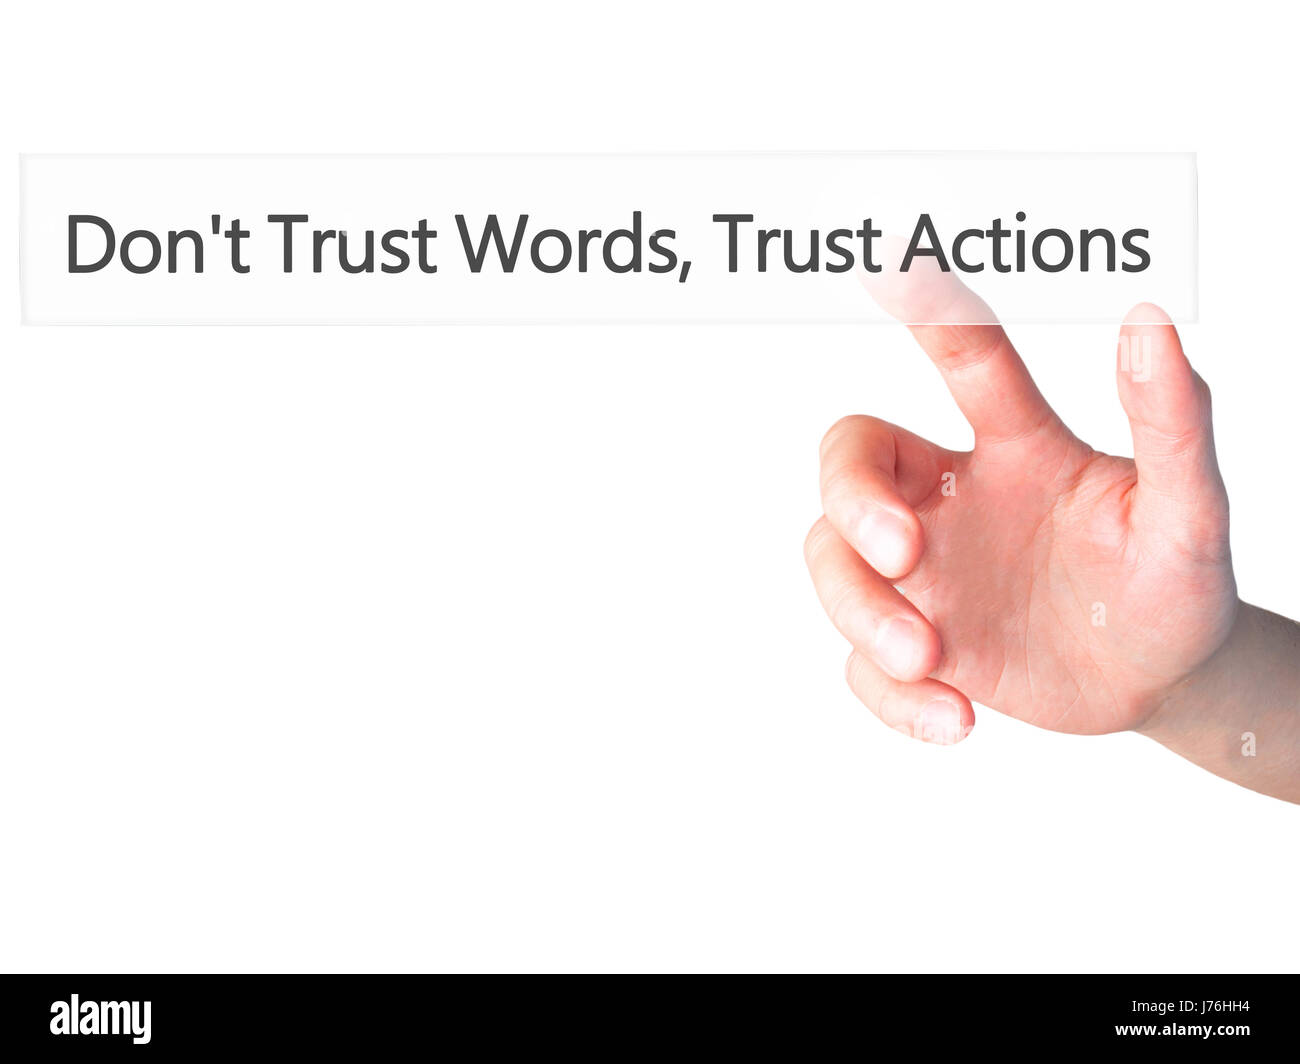 Don't Trust Words, Trust Actions - Hand pressing a button on blurred background concept . Business, technology, internet concept. Stock Photo Stock Photo